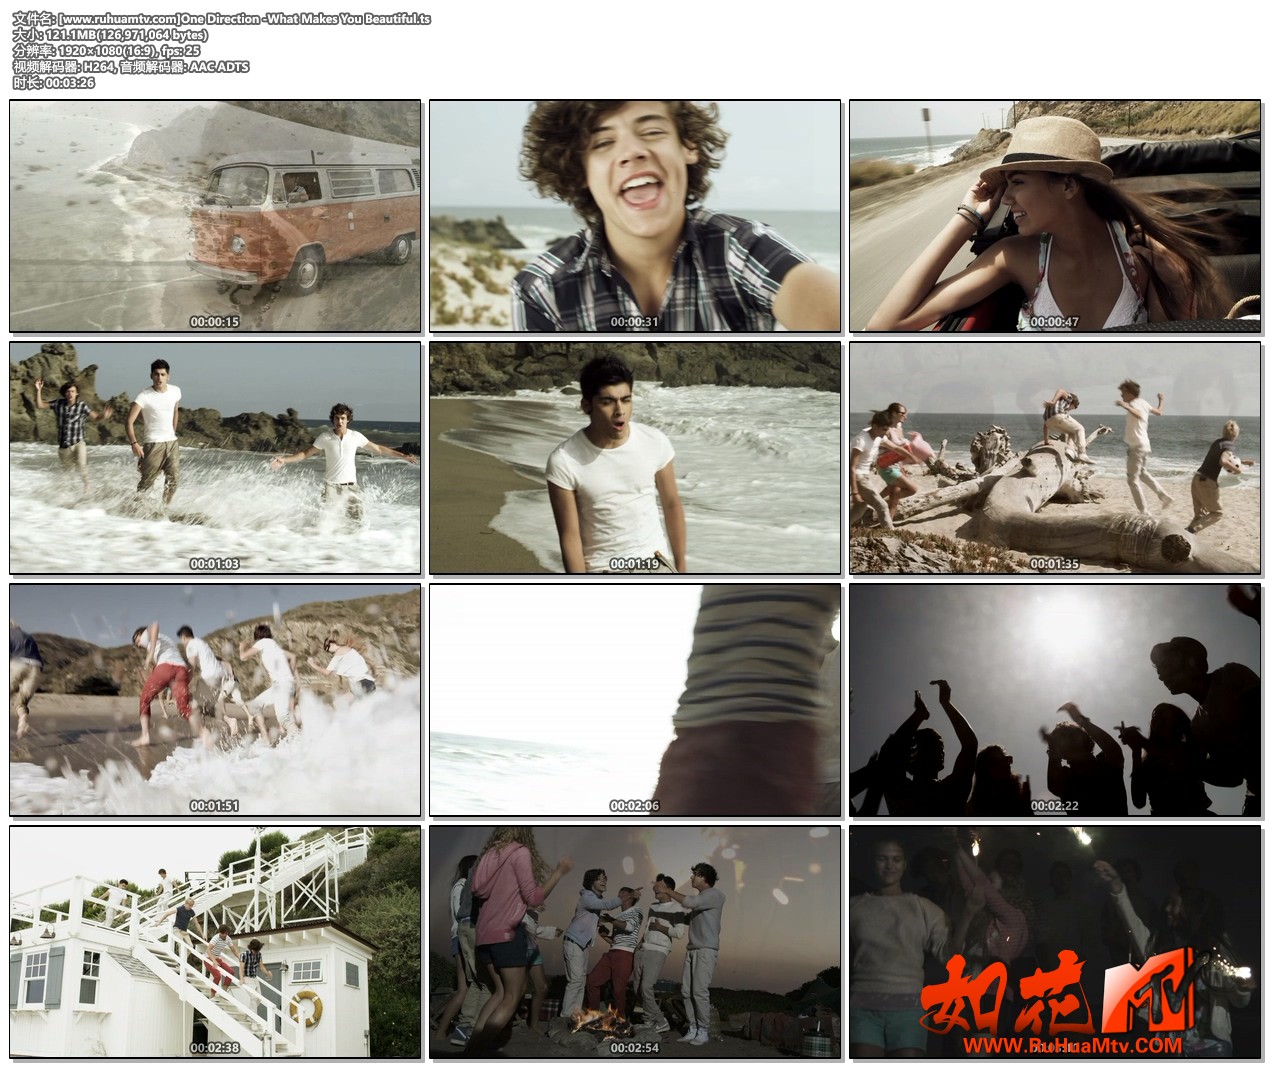 [www.ruhuamtv.com]One Direction -What Makes You Beautiful.ts.jpg